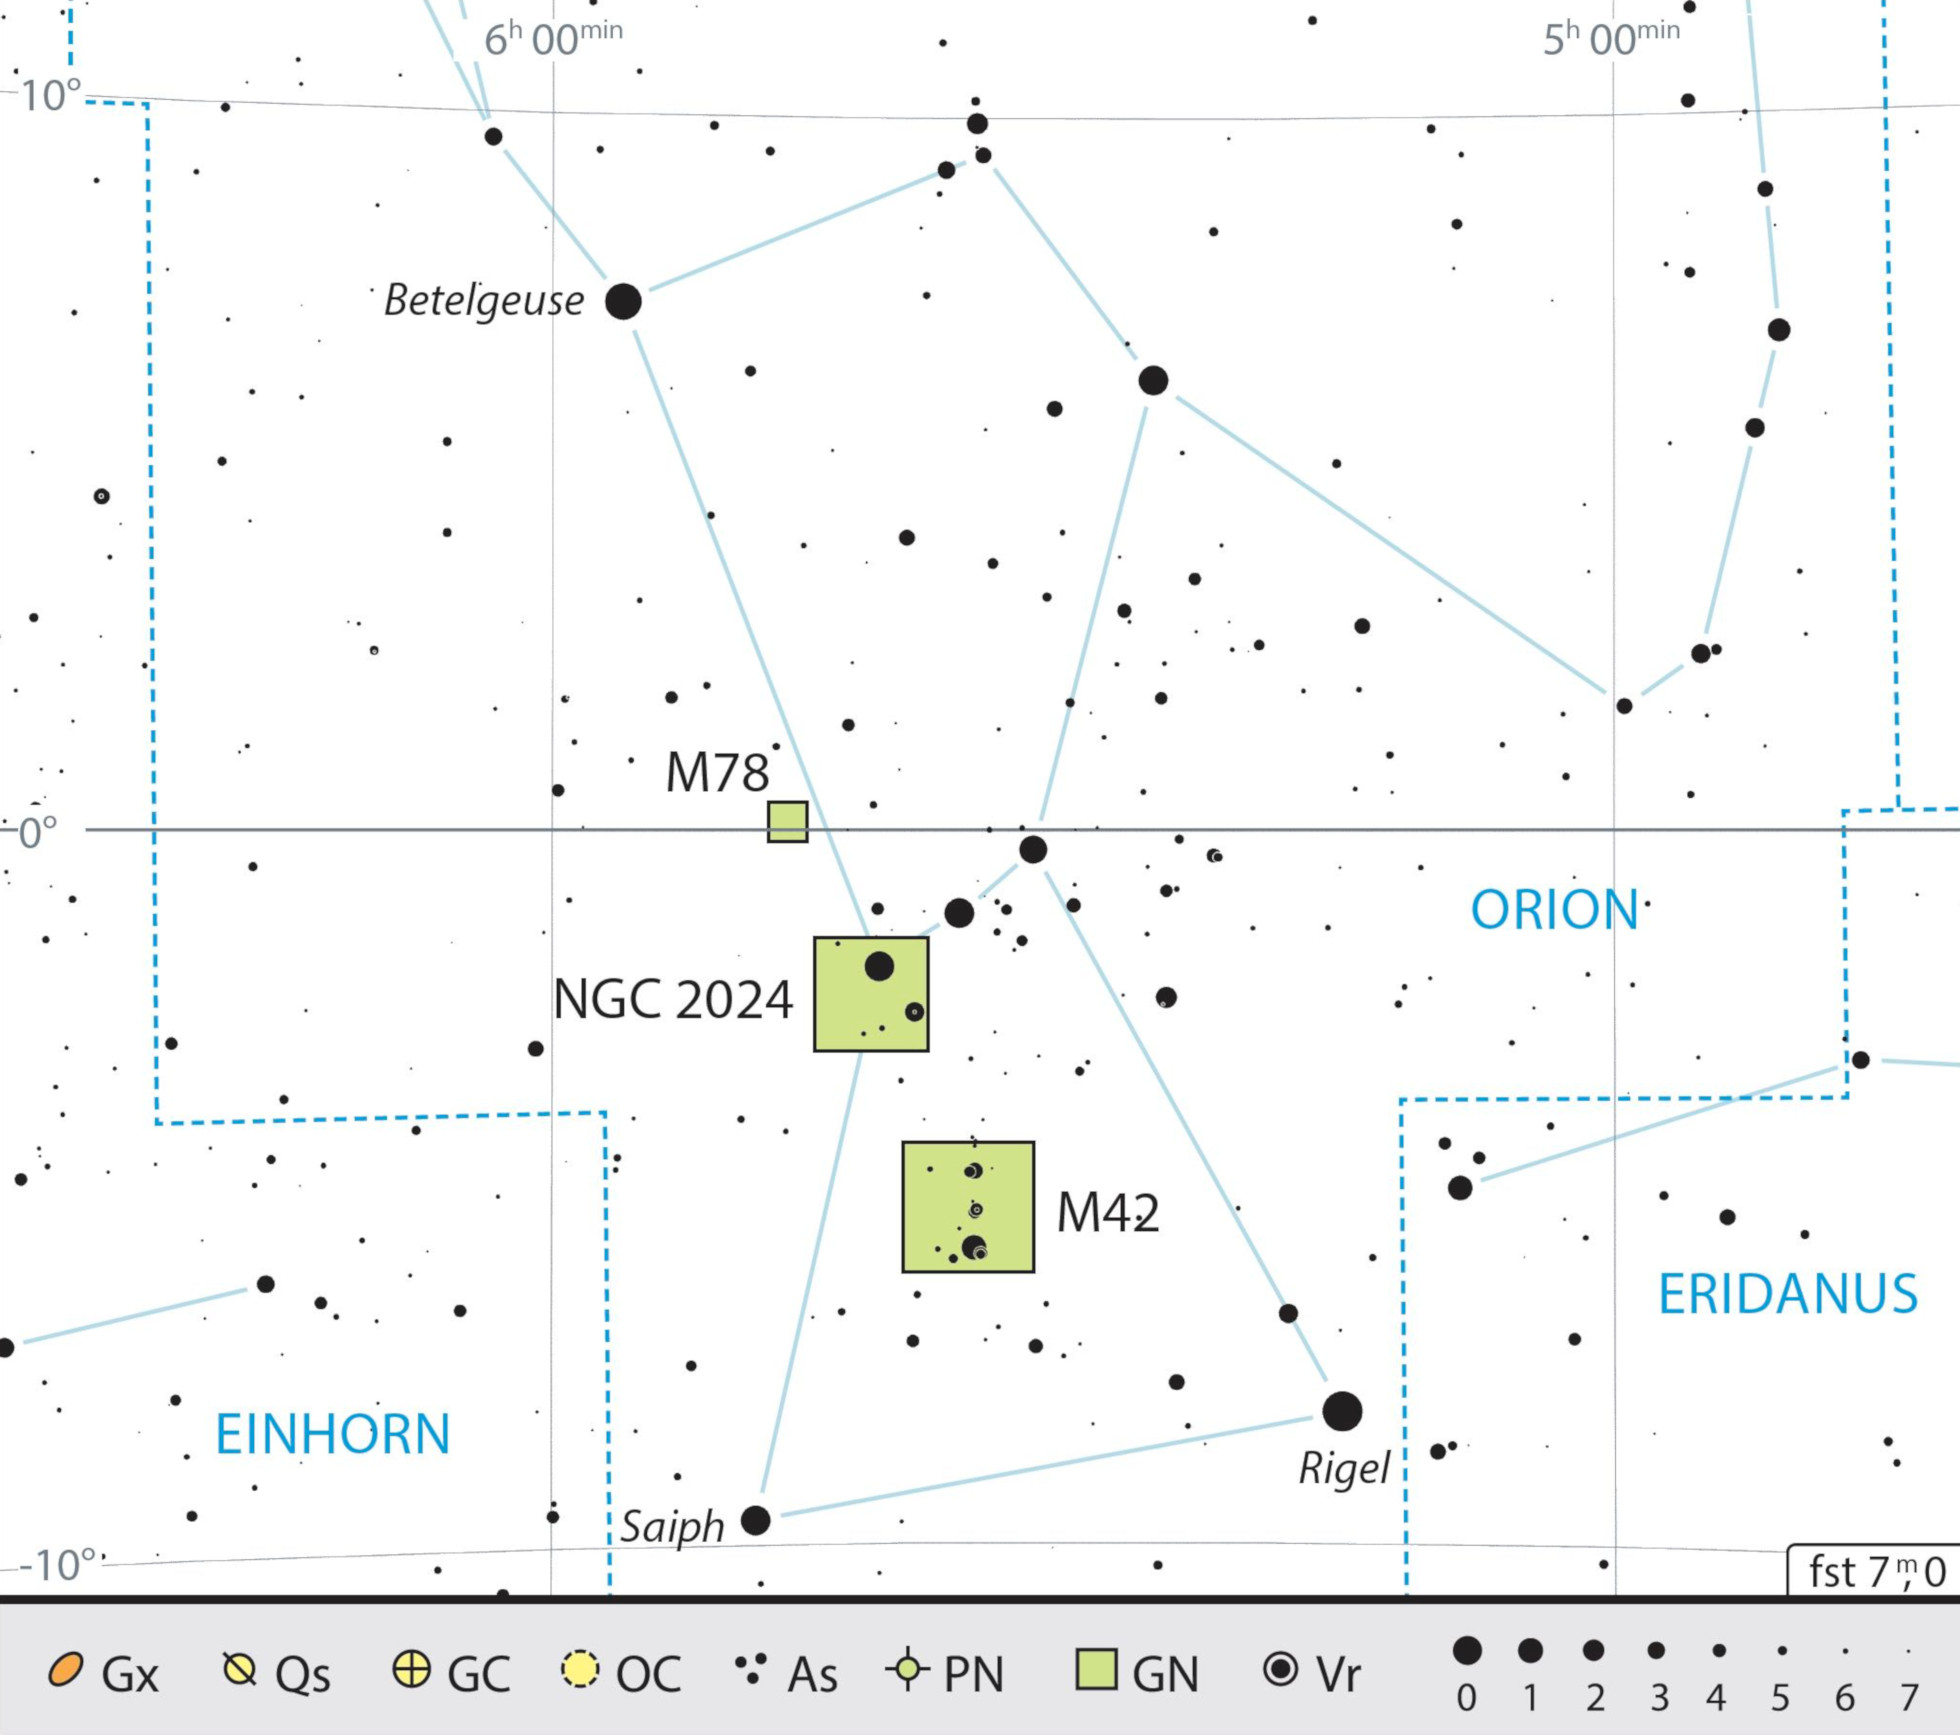 Outline map of the constellation of Orion with our observing recommendations. J. Scholten